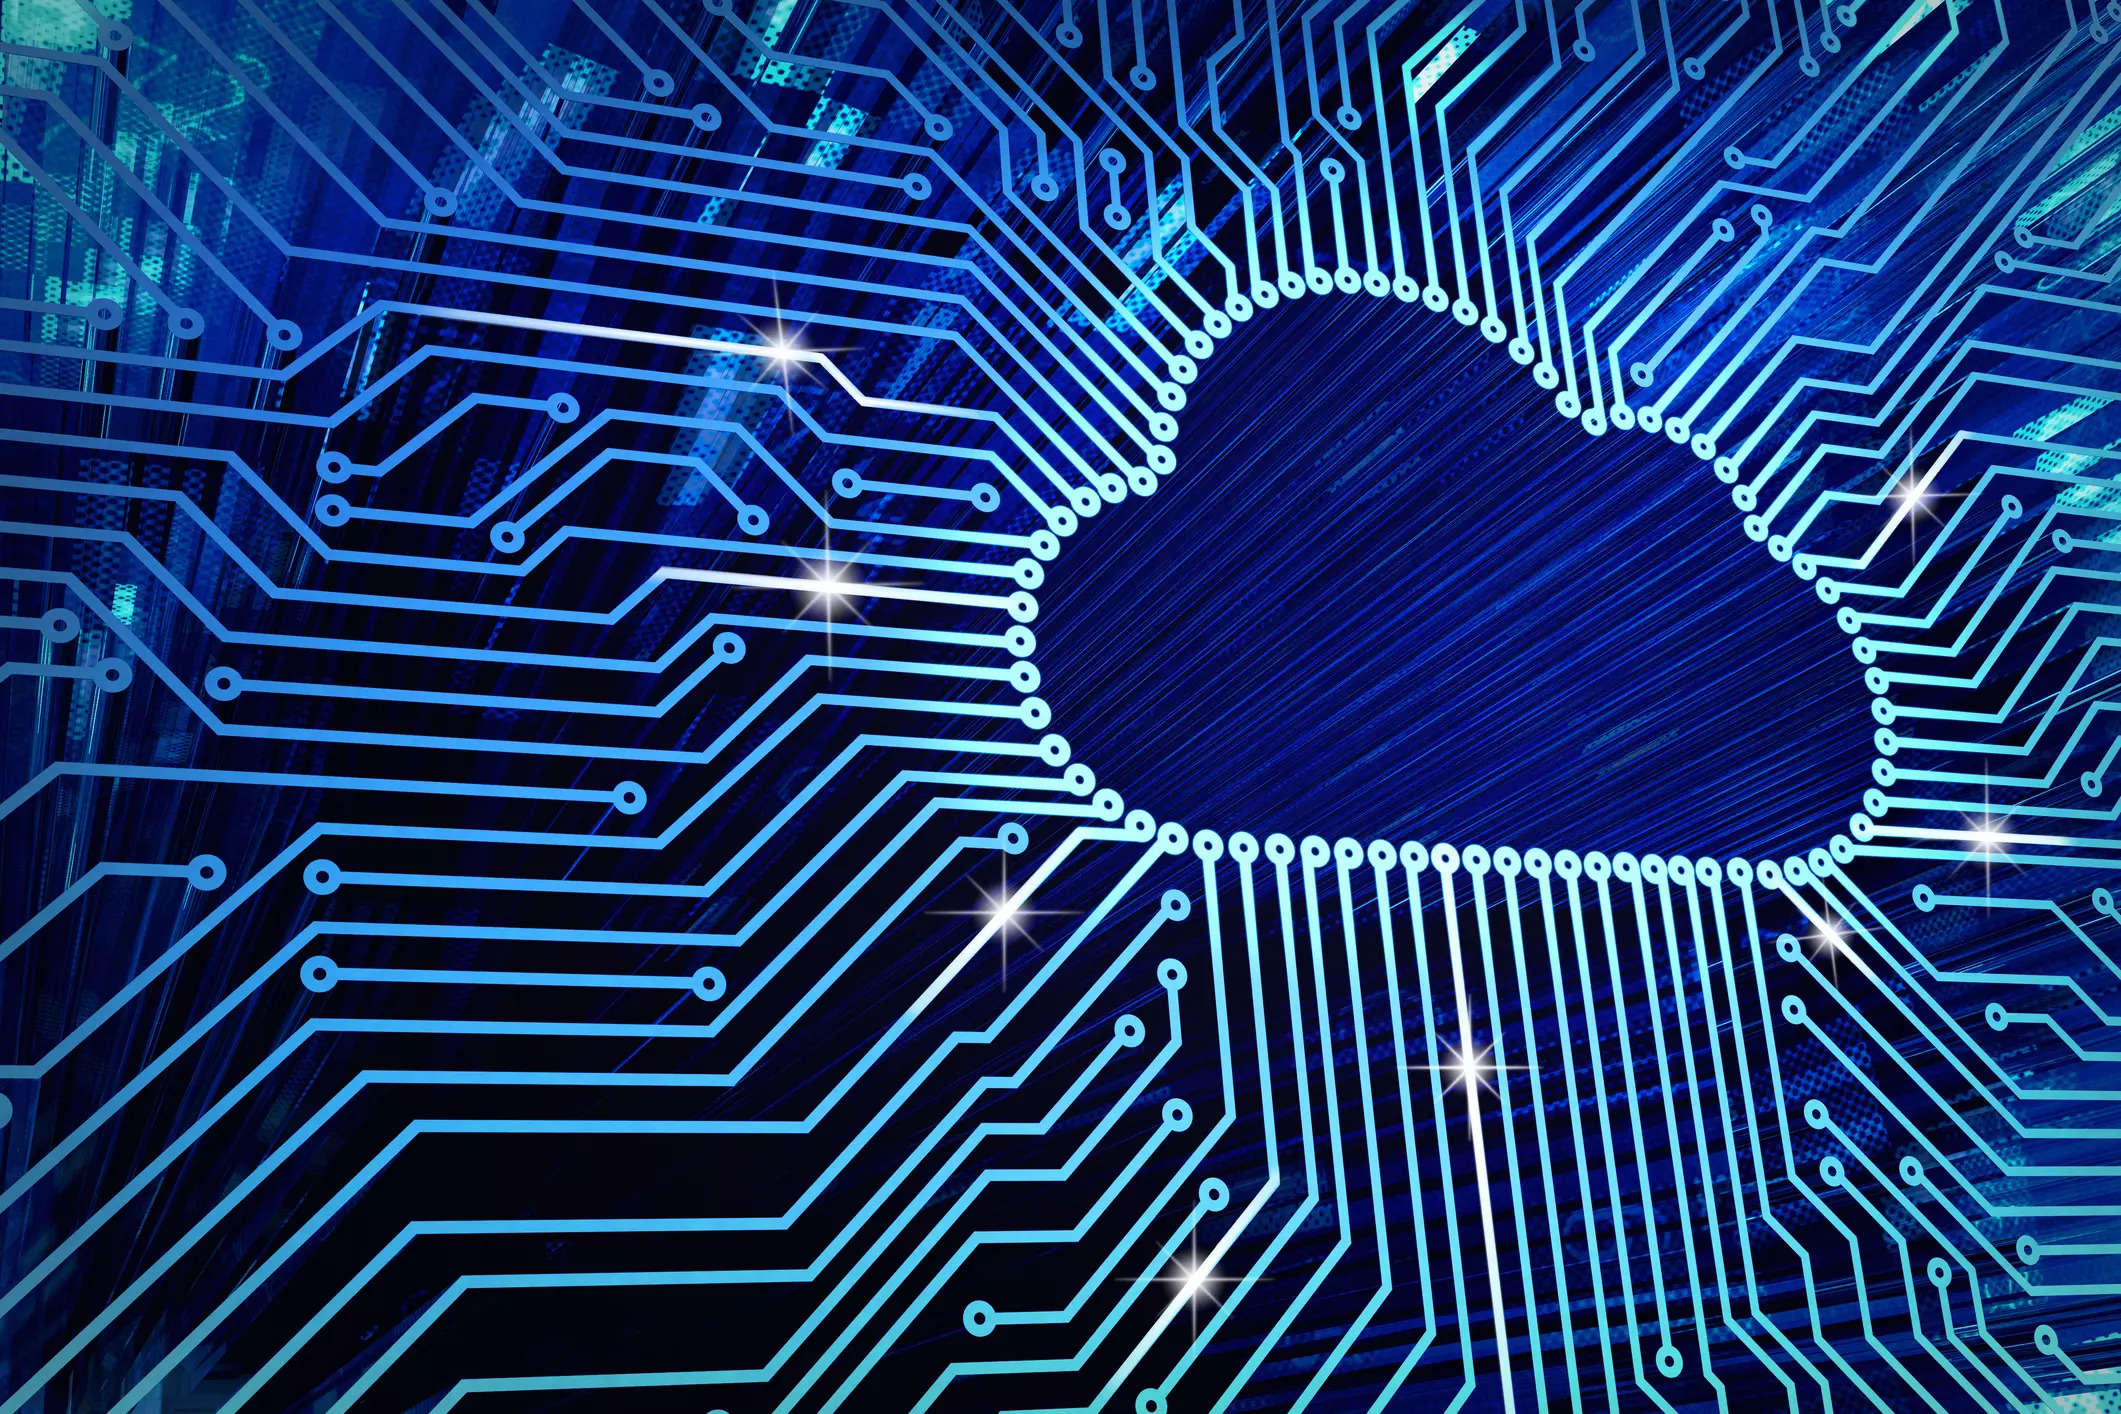 Multi-cloud Security Market to be Worth $10.5 Billion by 2027: Report